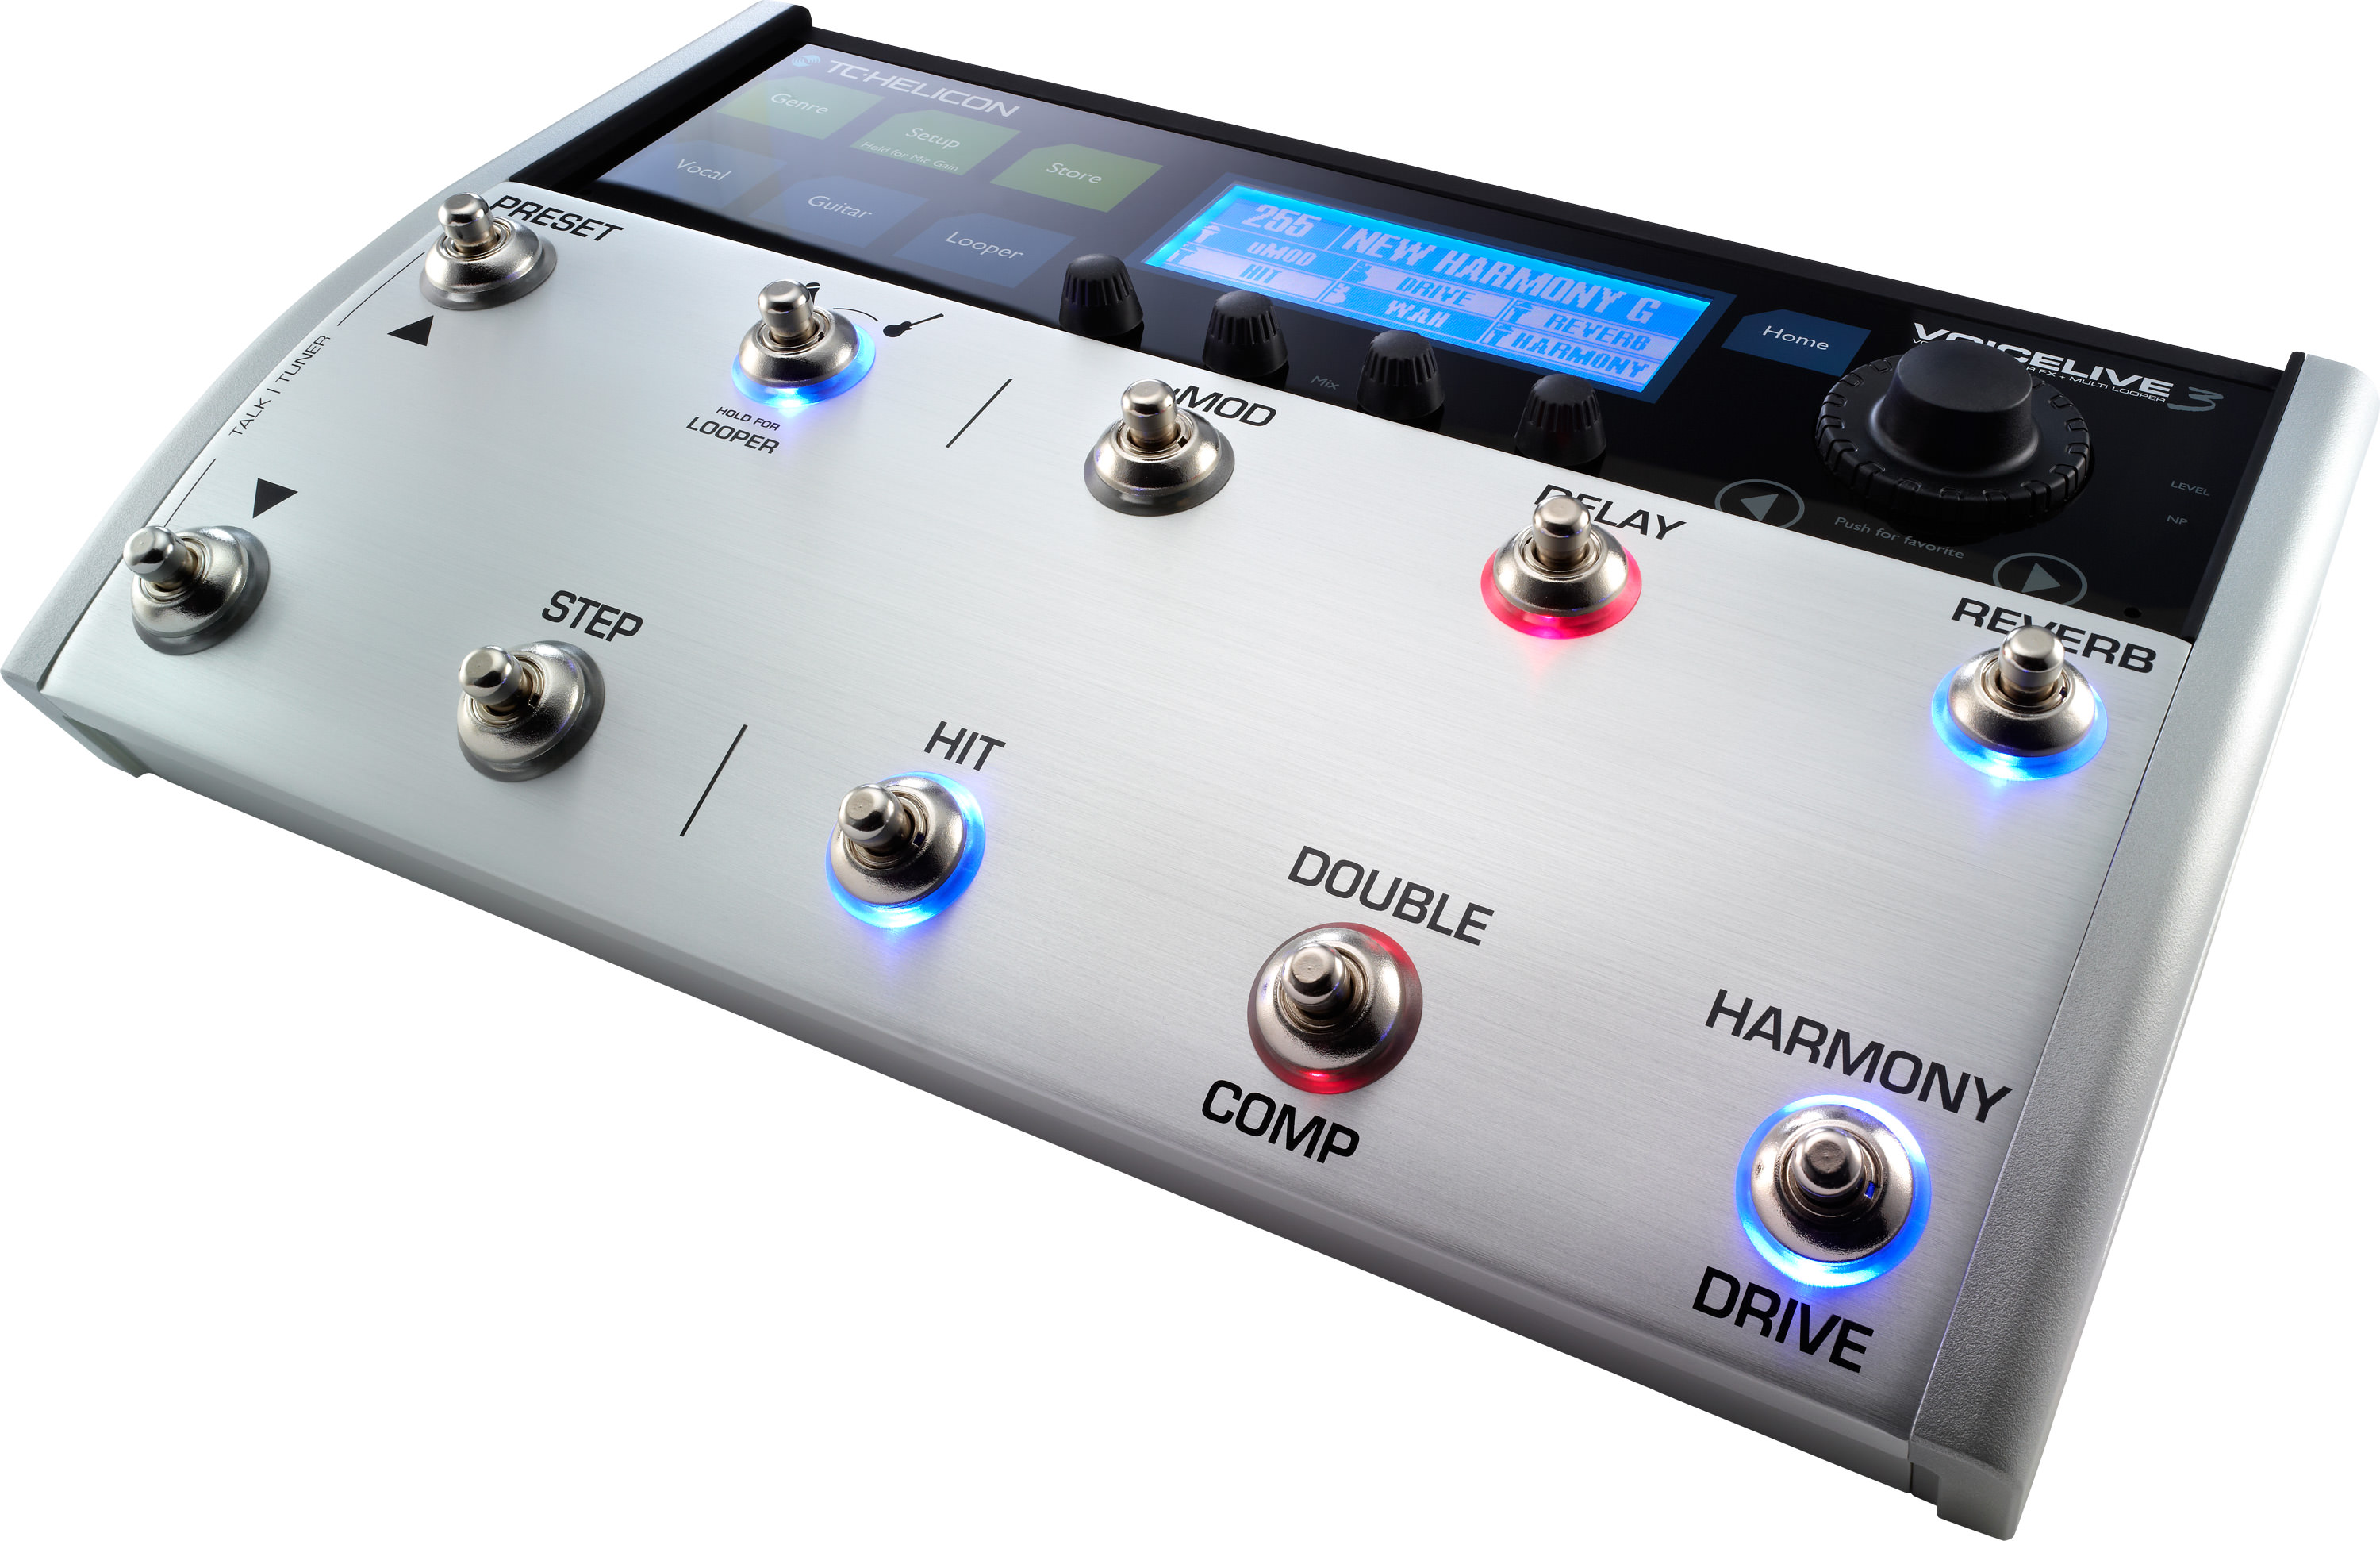 Tc-helicon Voice Live 3 2014 - Effects processor - Variation 2